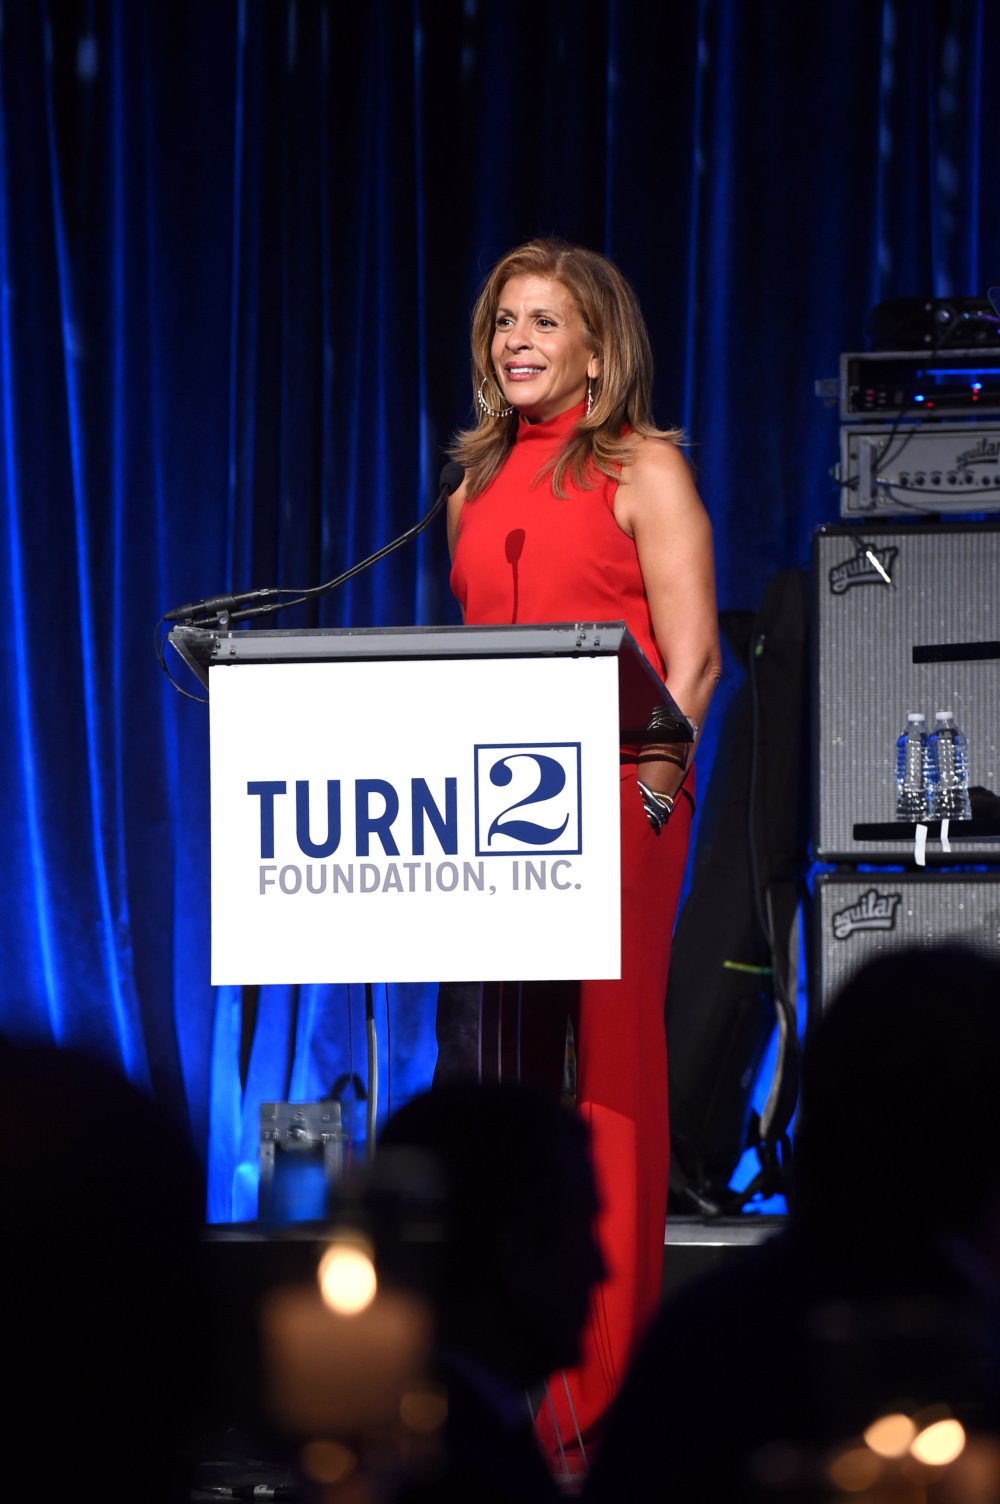 Why Hoda Kotb Considered Not Returning to ‘Today’ Show After Daughter’s Birth - Derek Jeter’s 23rd Annual Turn 2 Foundation Dinner